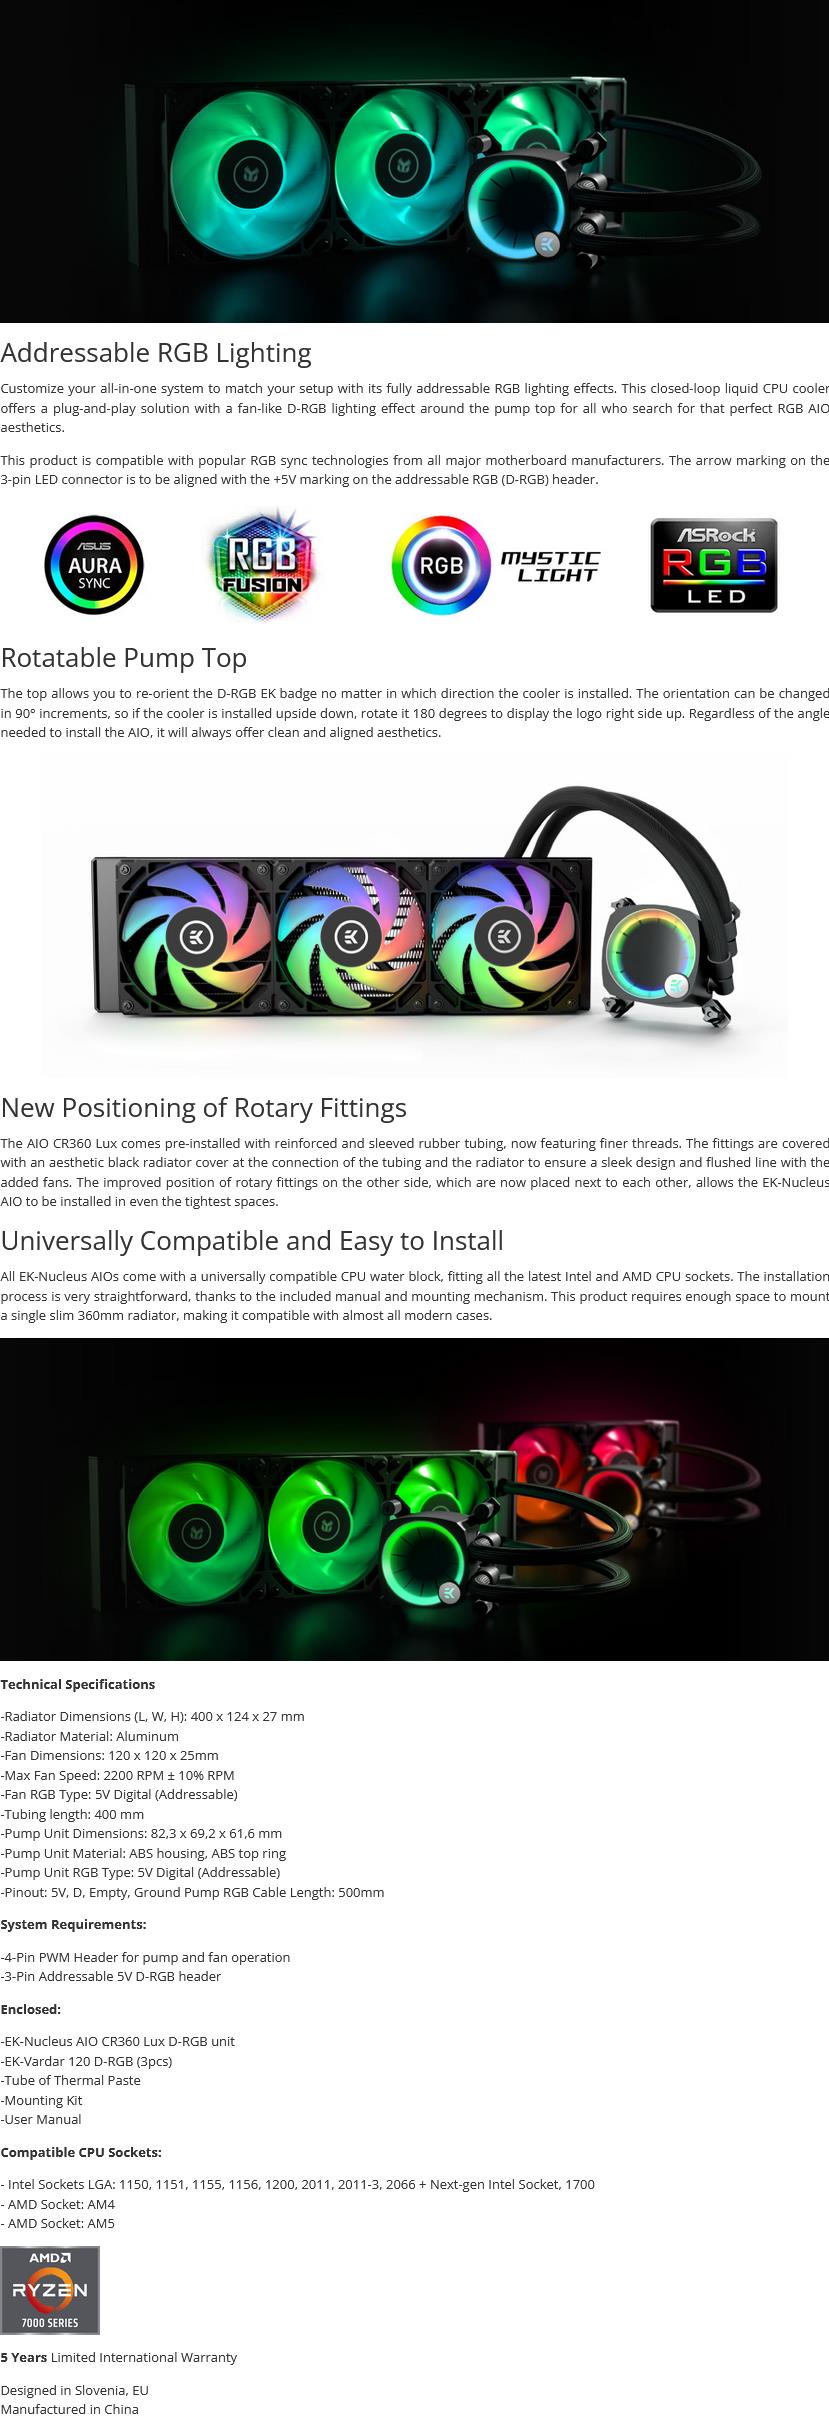 A large marketing image providing additional information about the product EK Nucleus 360mm Lux D-RGB AIO Liquid CPU Cooler - Black - Additional alt info not provided